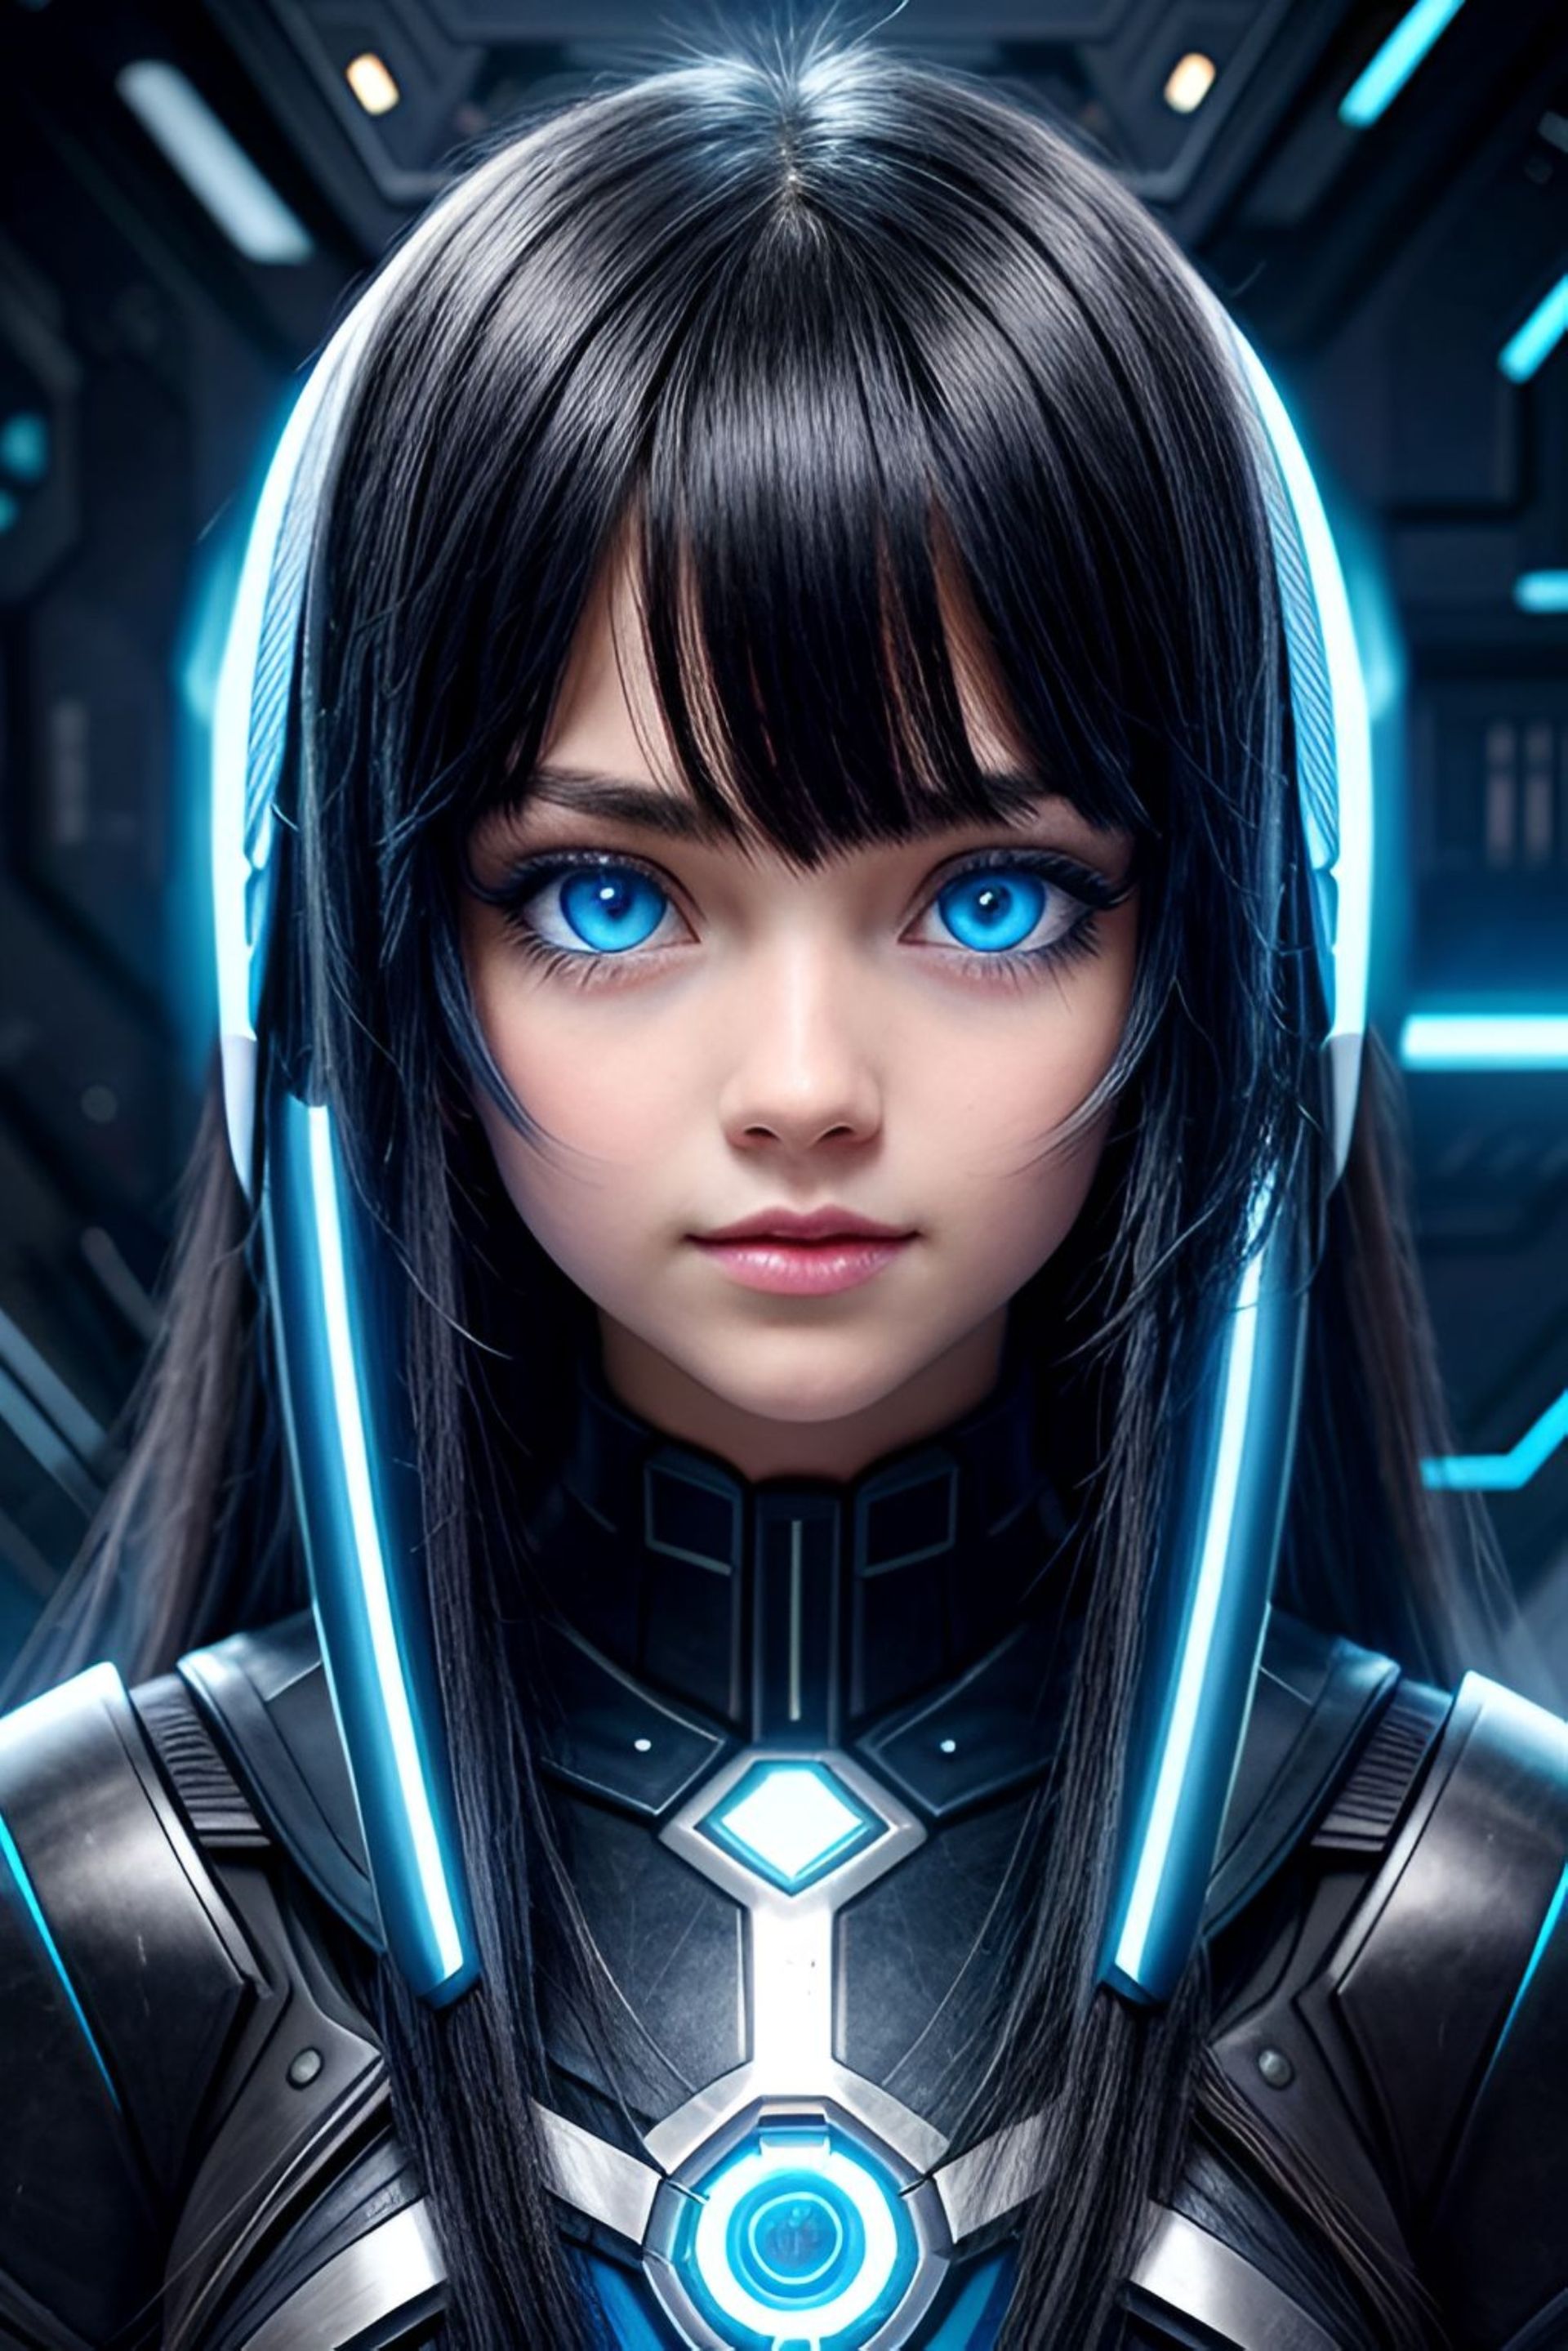 Free photo A girl, cyborg, with blue eyes, wearing power armor.